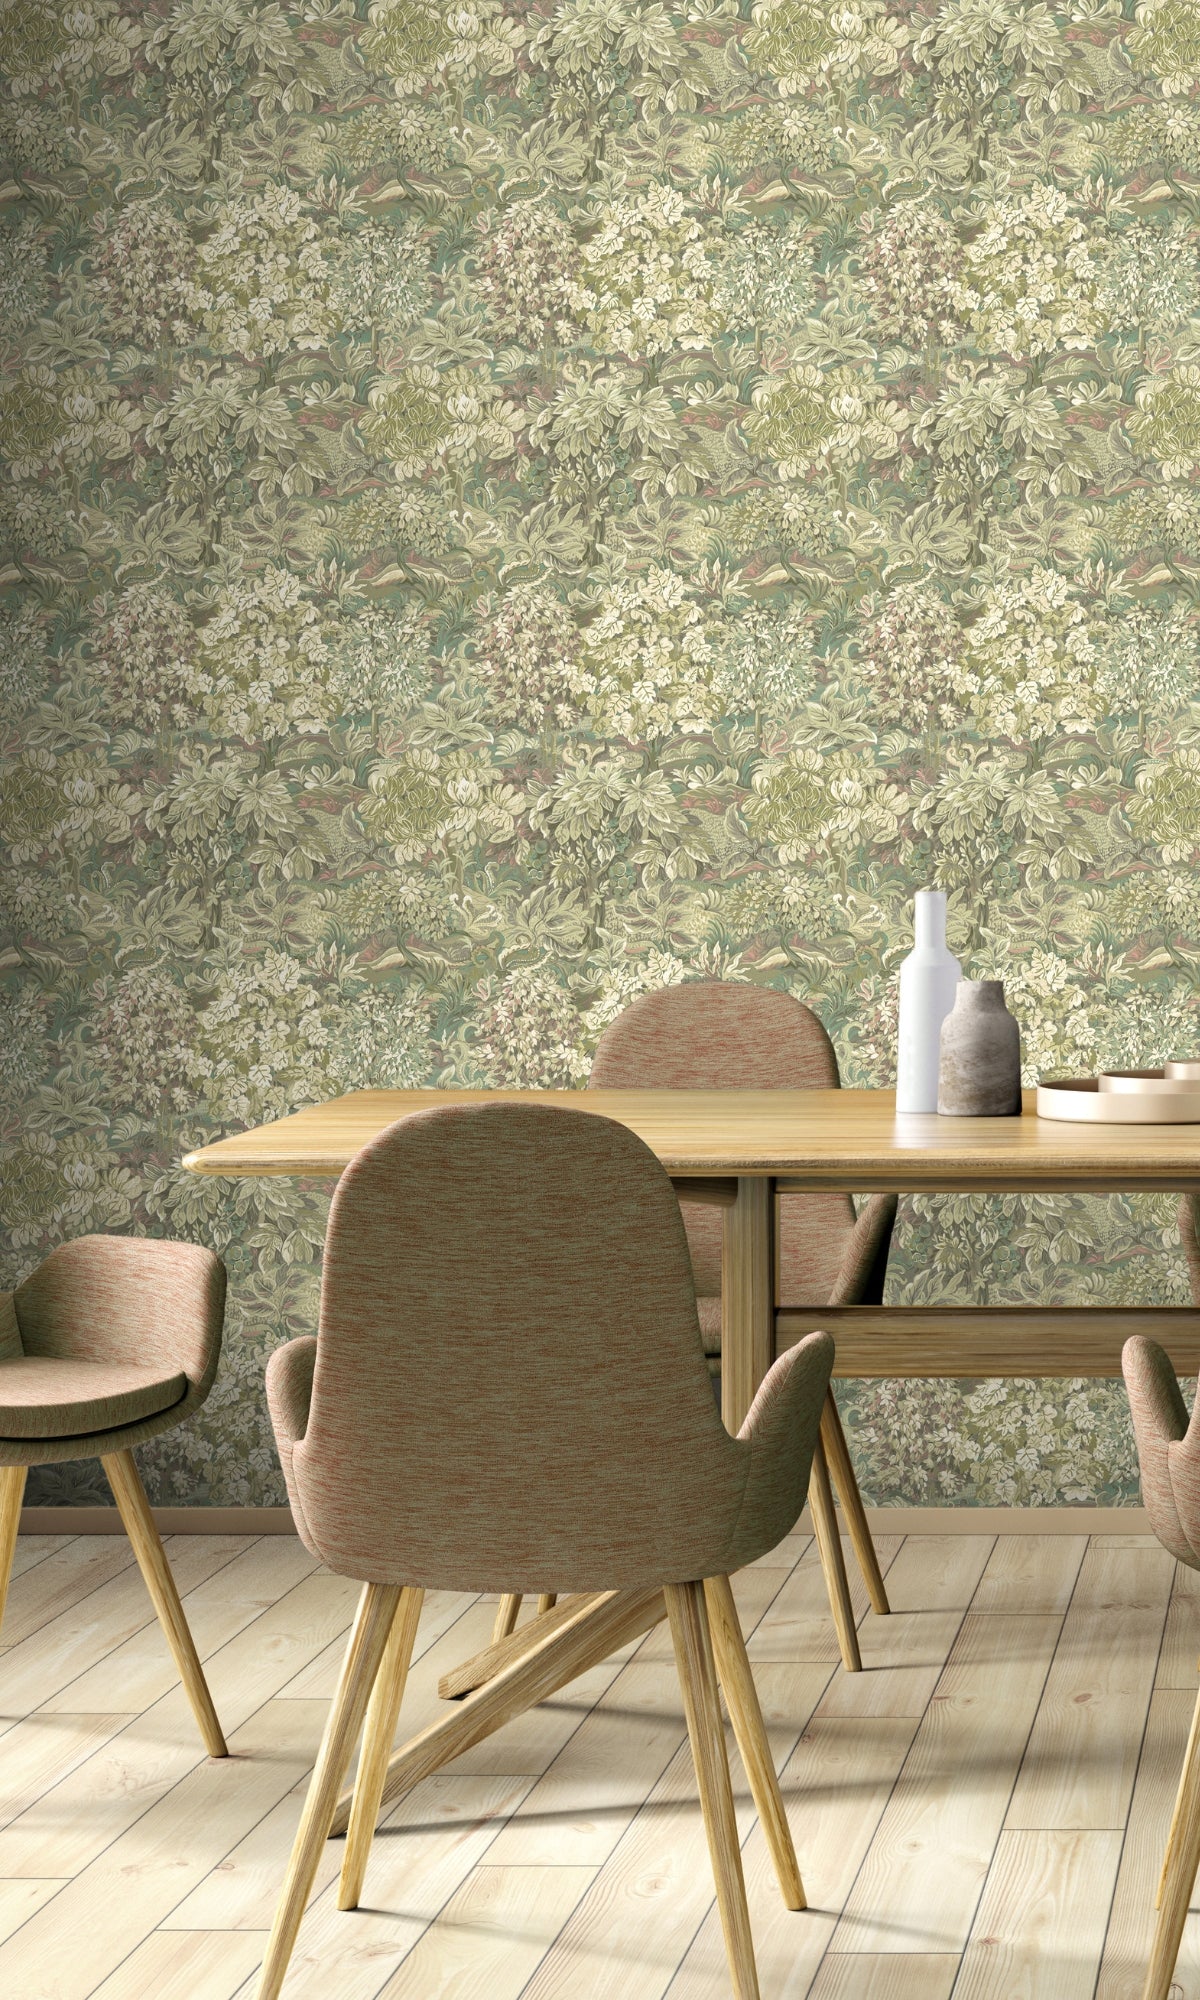 Green Floral Foliage Floral Wallpaper R8798